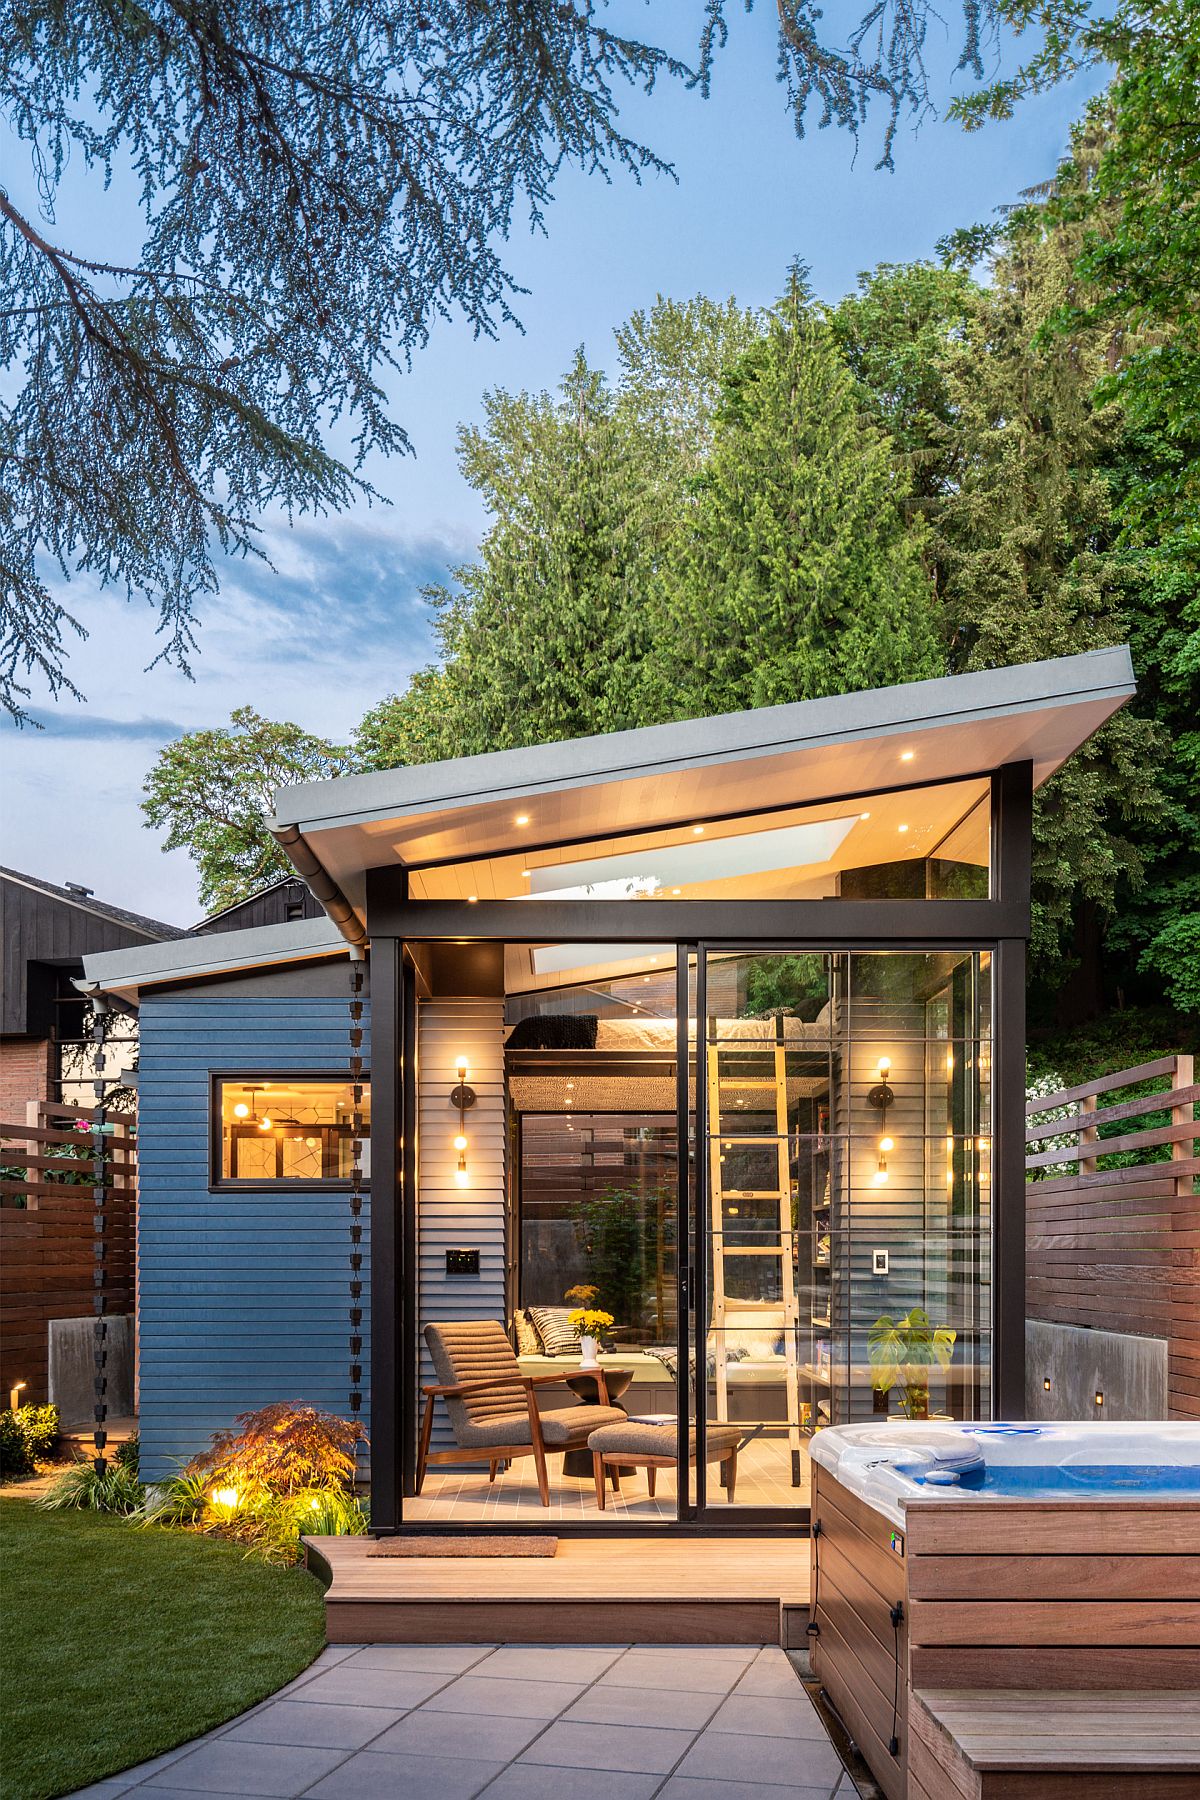 This ultra modern backyard shed has a small footprint yet several functions and zones inside, much light and storage